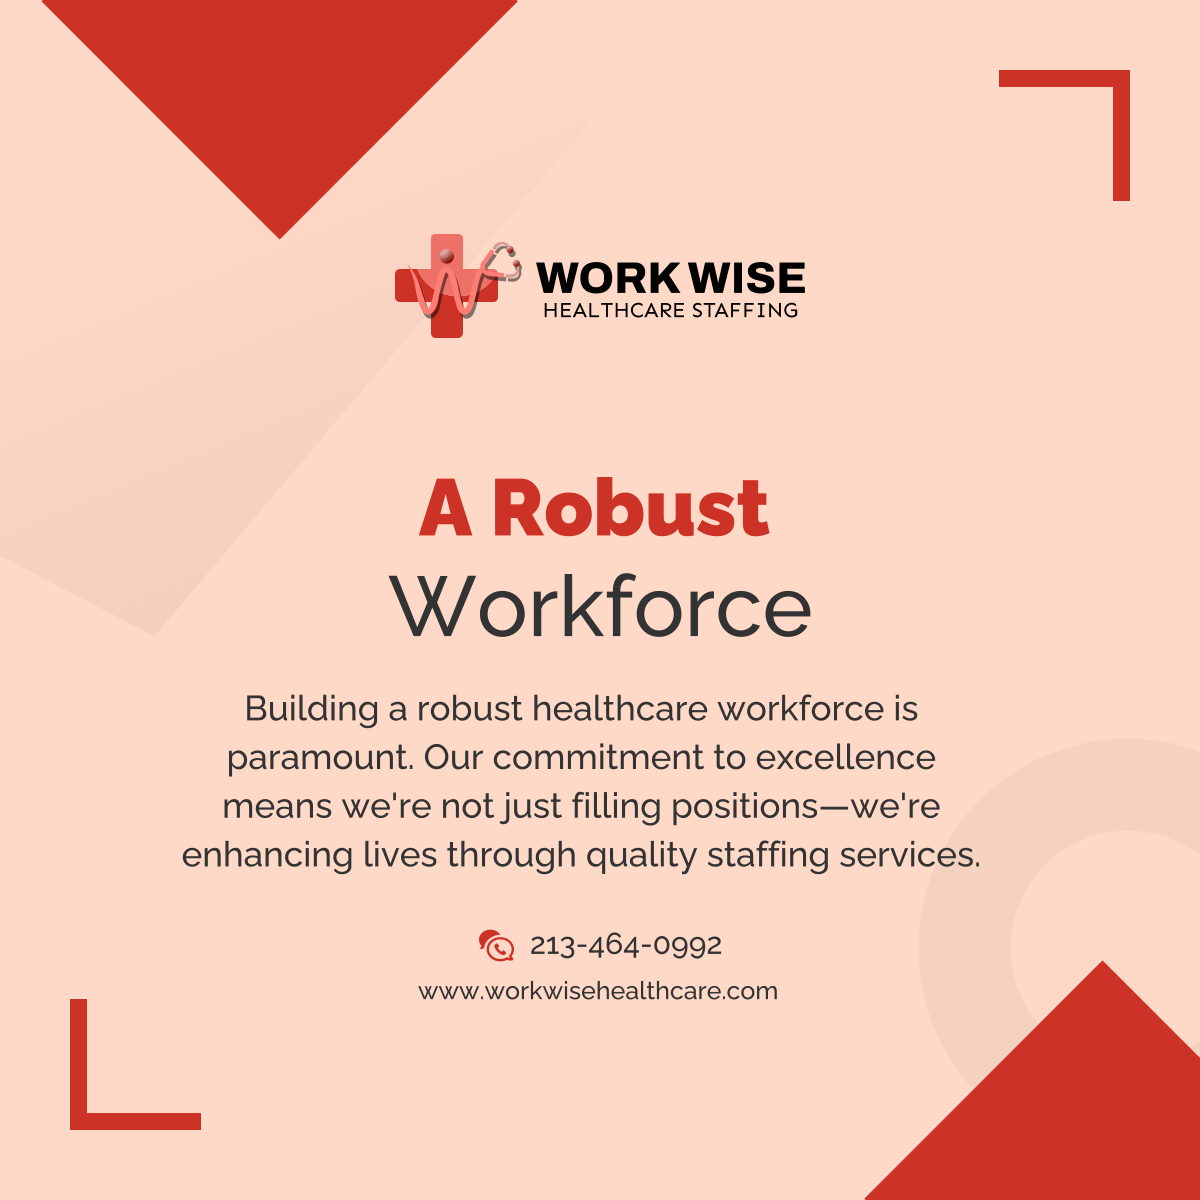 Trust us to elevate your healthcare facility with staff who exceed your expectations. Join forces with Work Wise Staffing and Consulting and be part of shaping a promising future for healthcare in California. 

#LosAngelesCalifornia #MedicalStaffing #RobustWorkforce